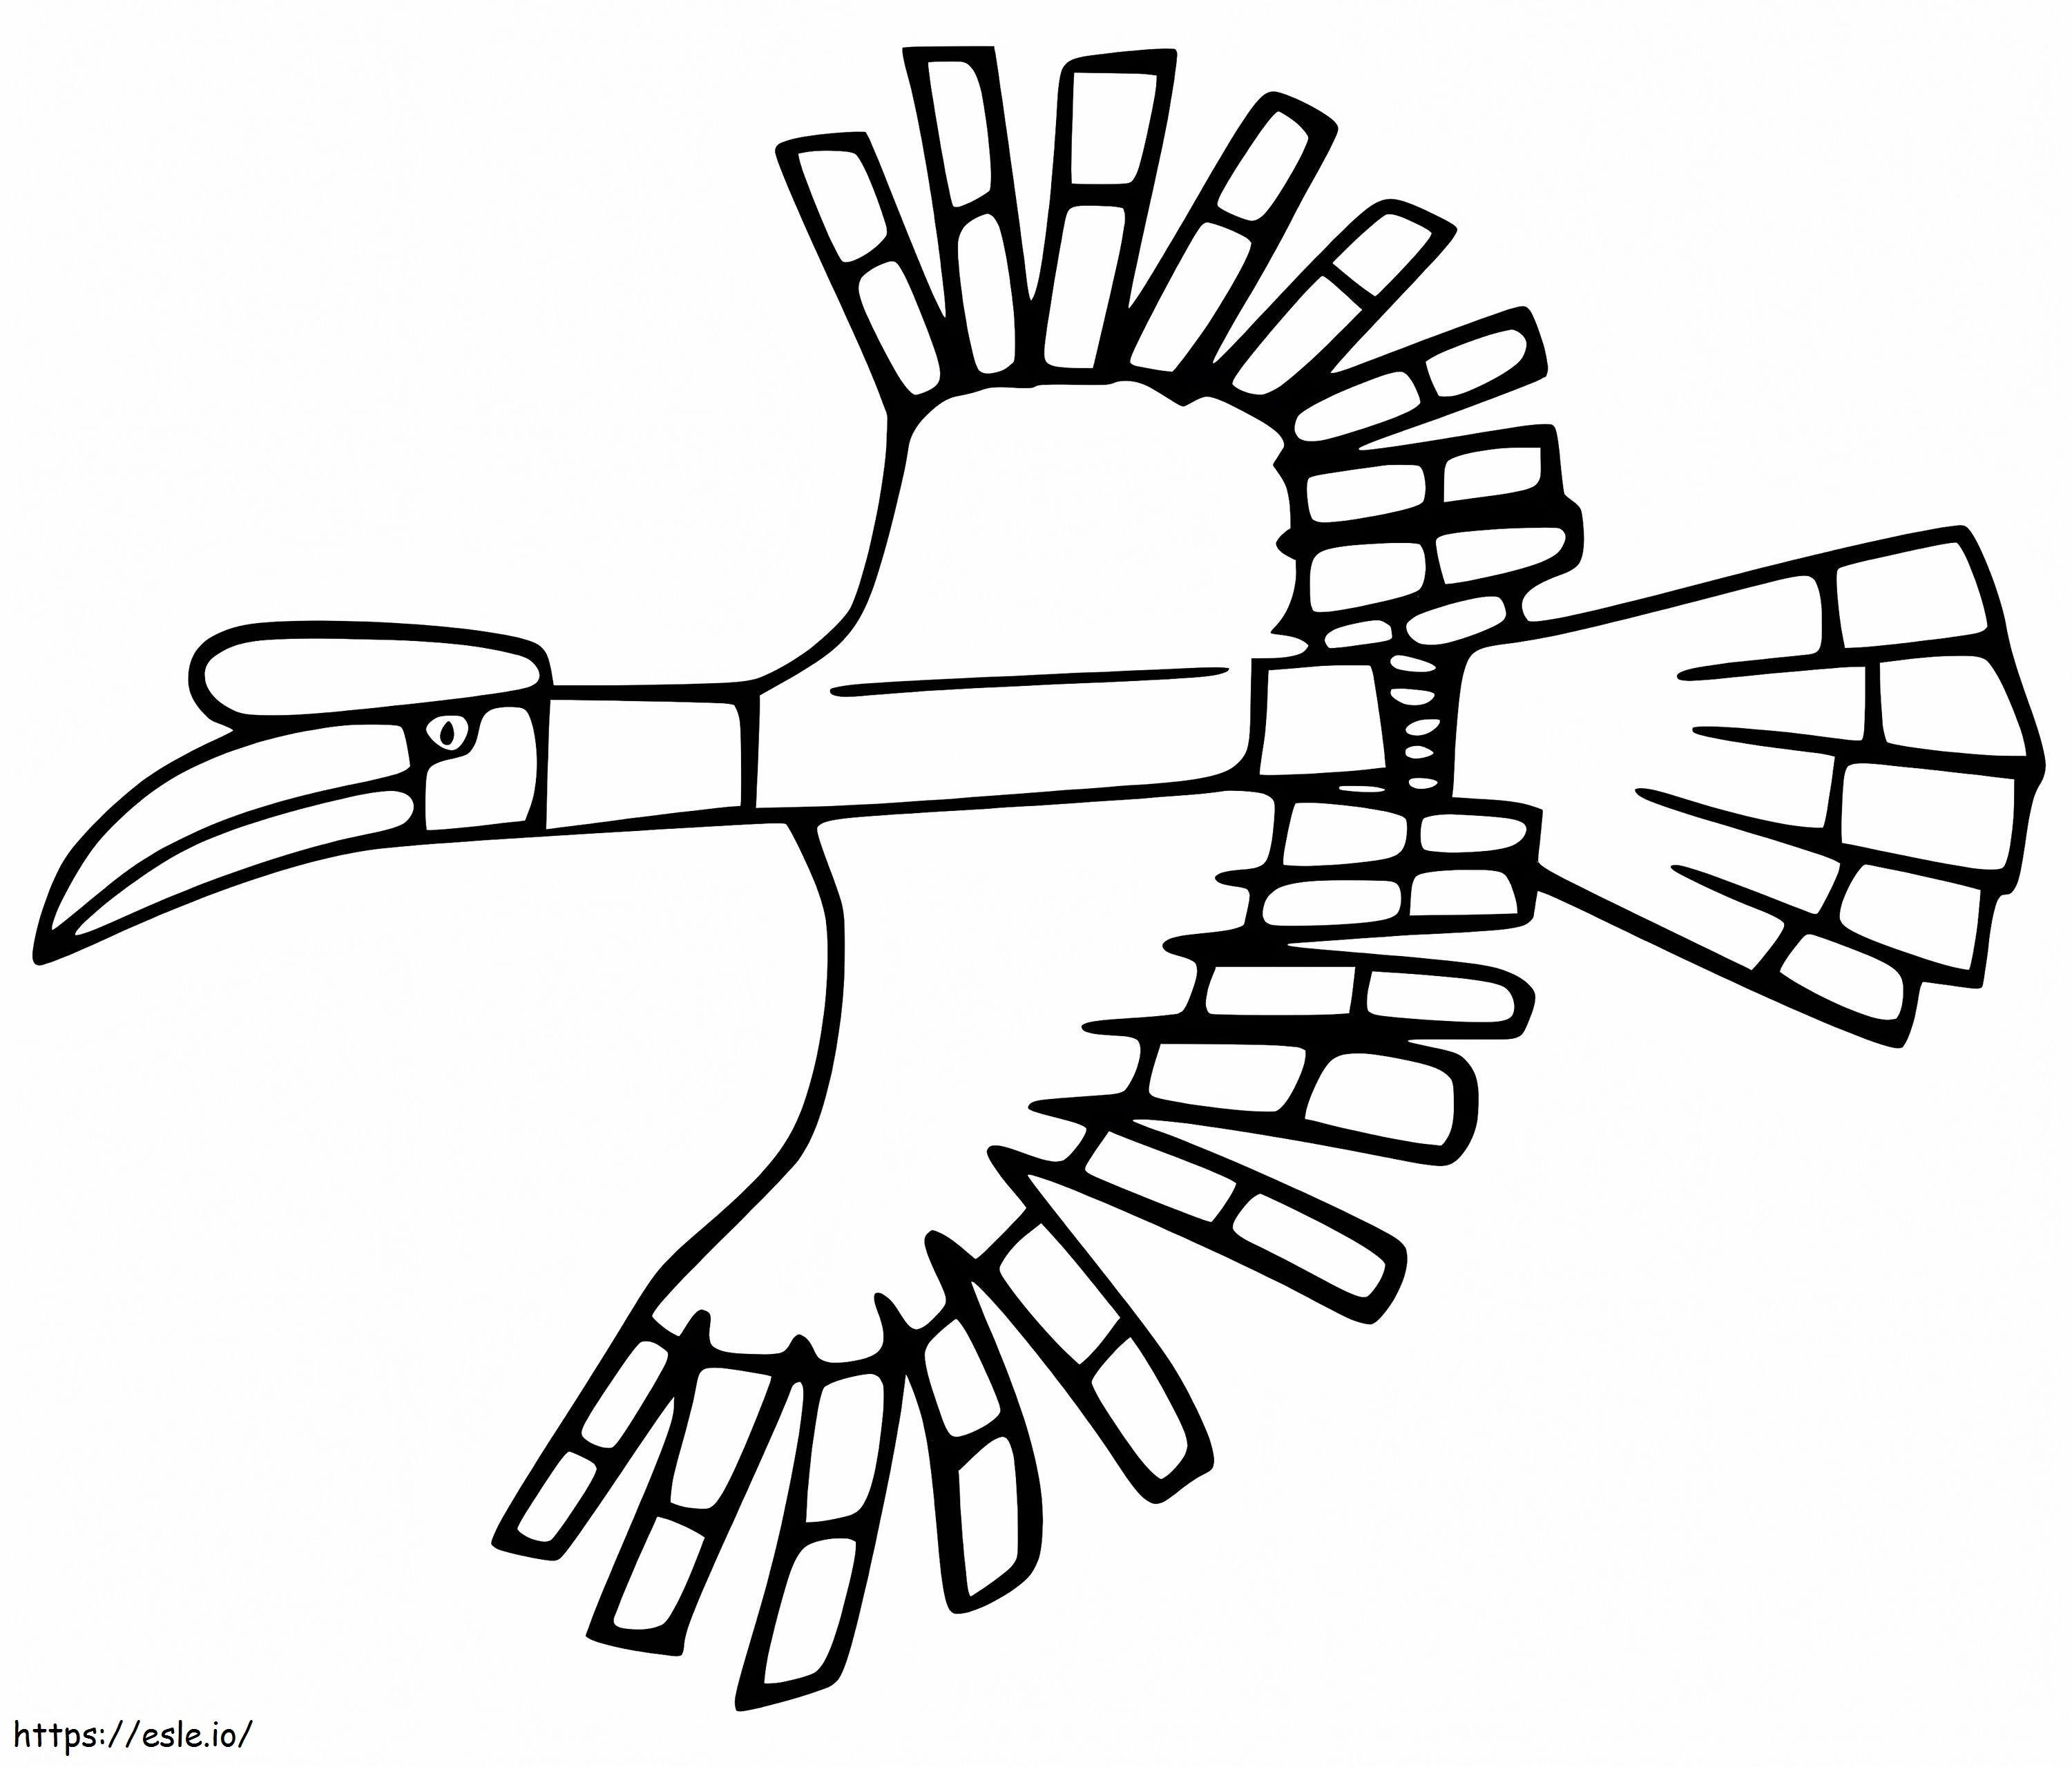 Hornbill Flying coloring page